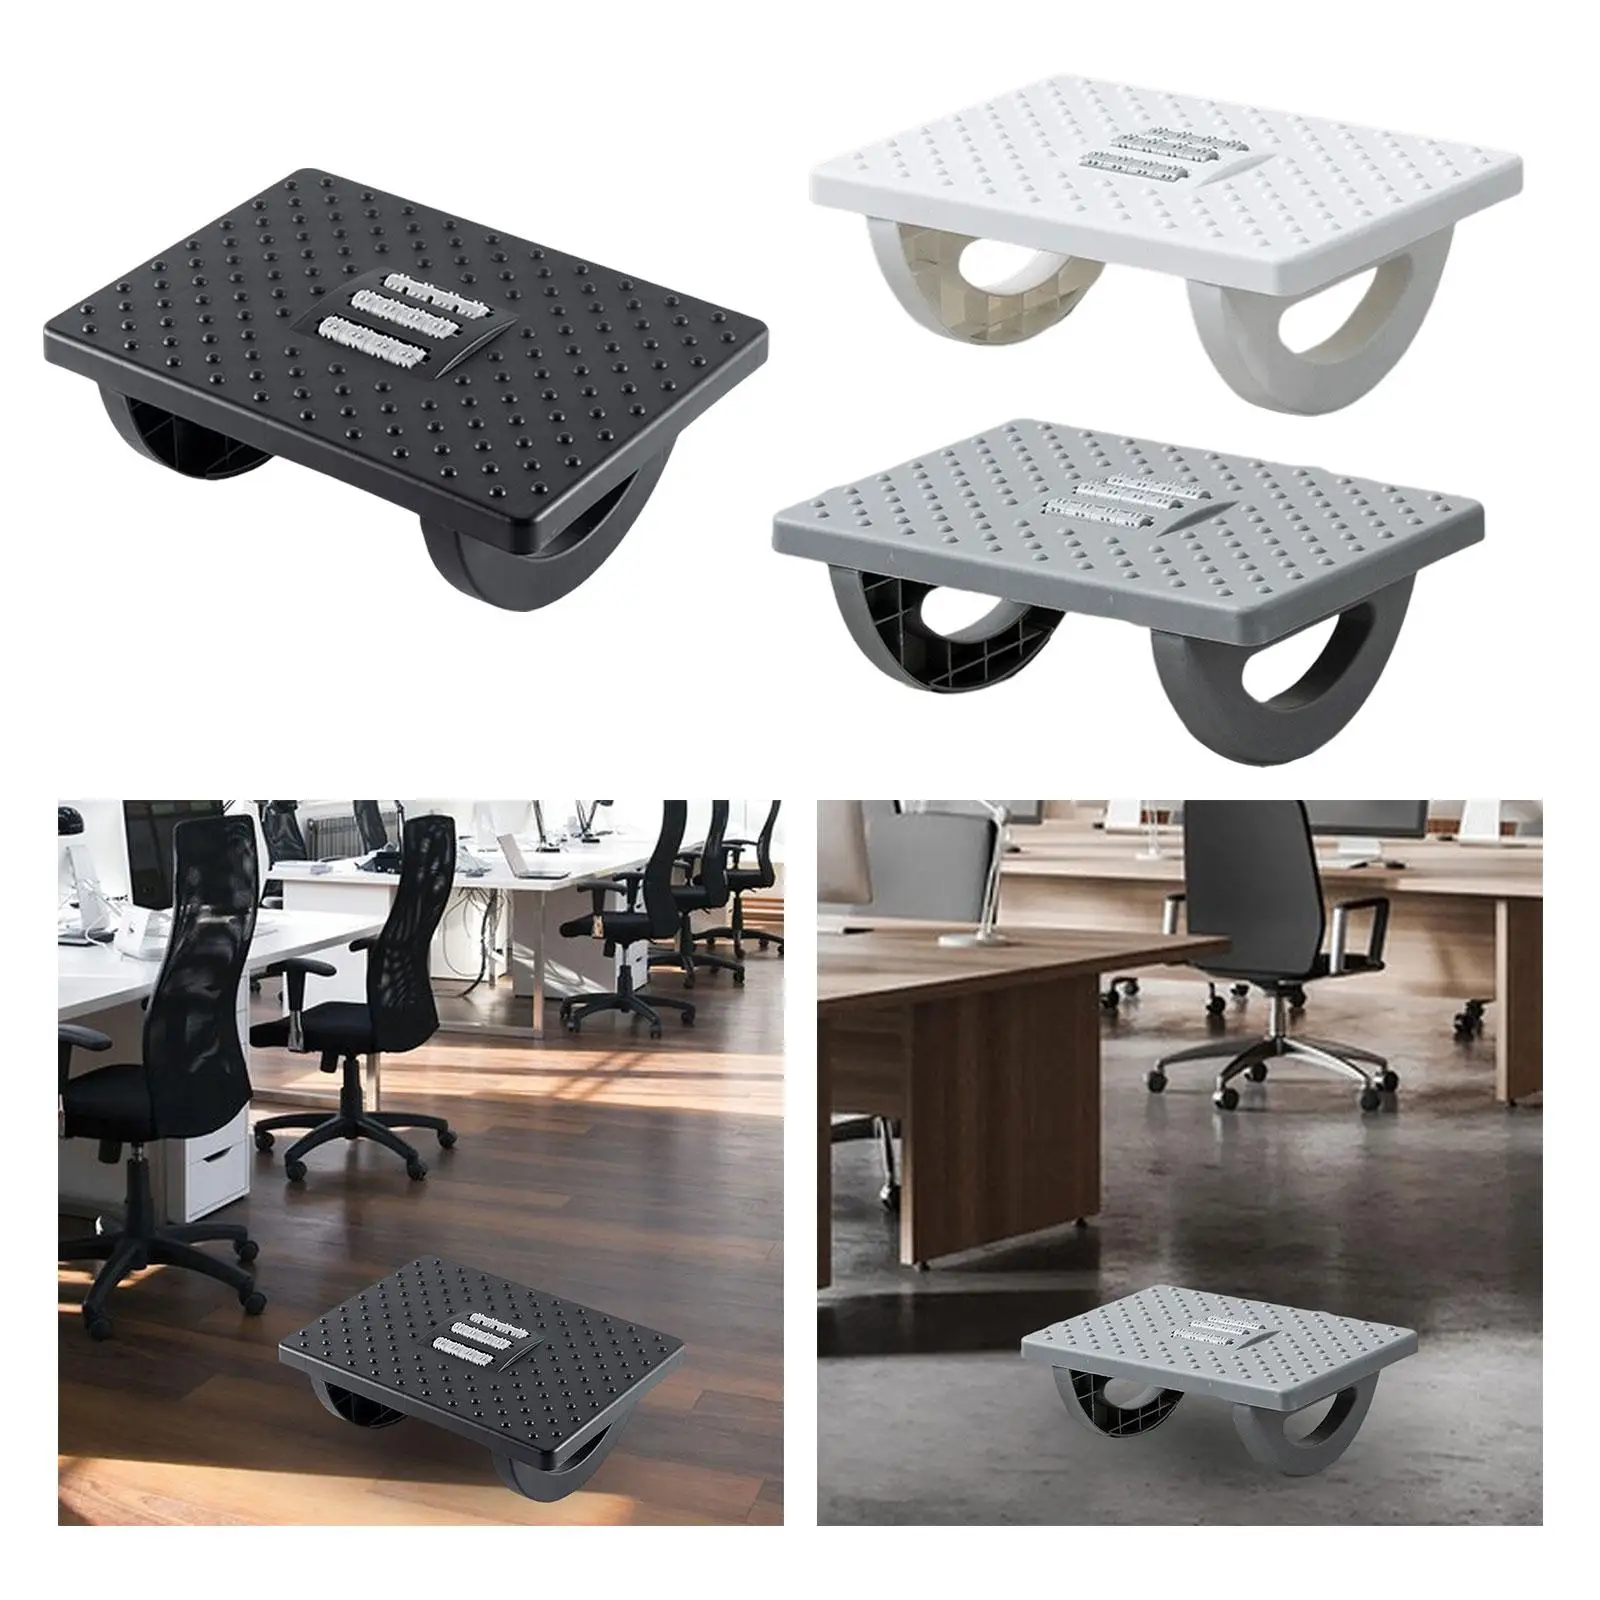 Foot Rest under Desk, Comfortable Office Footrests Can Swing 180 ° Foot Stool Support for Work Gaming Office Study Computer